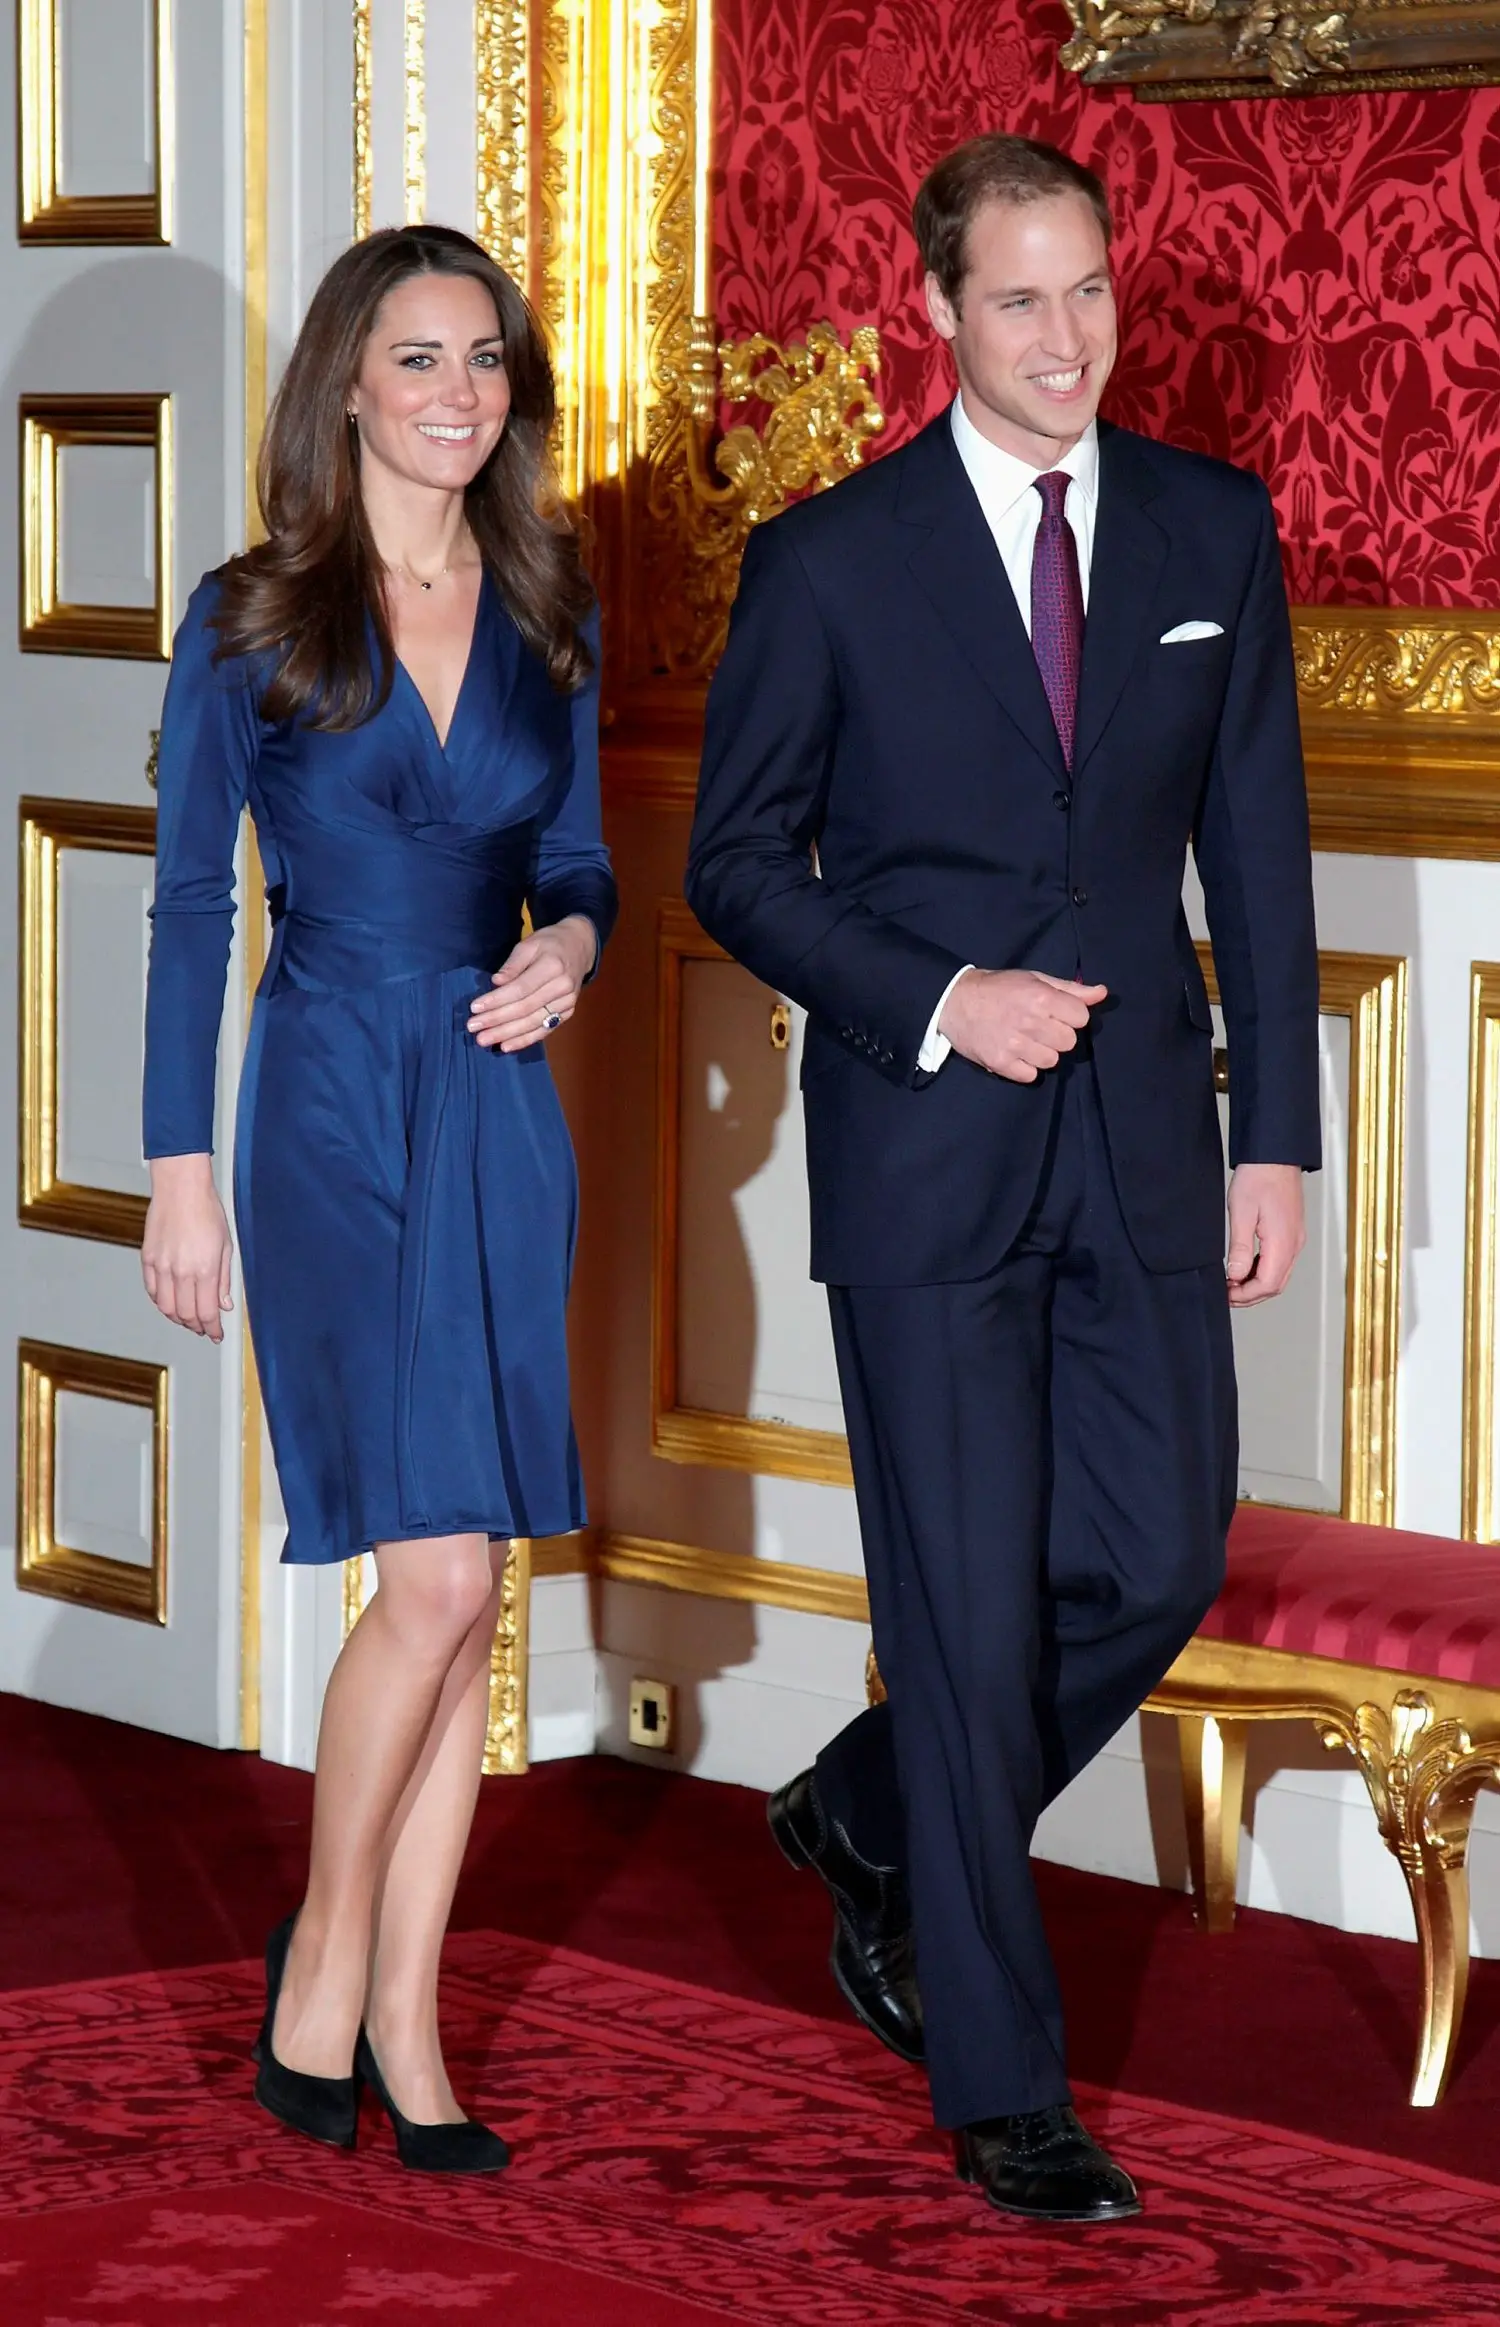 Prince William and Kate Middleton announced their engagmenet in November 2010